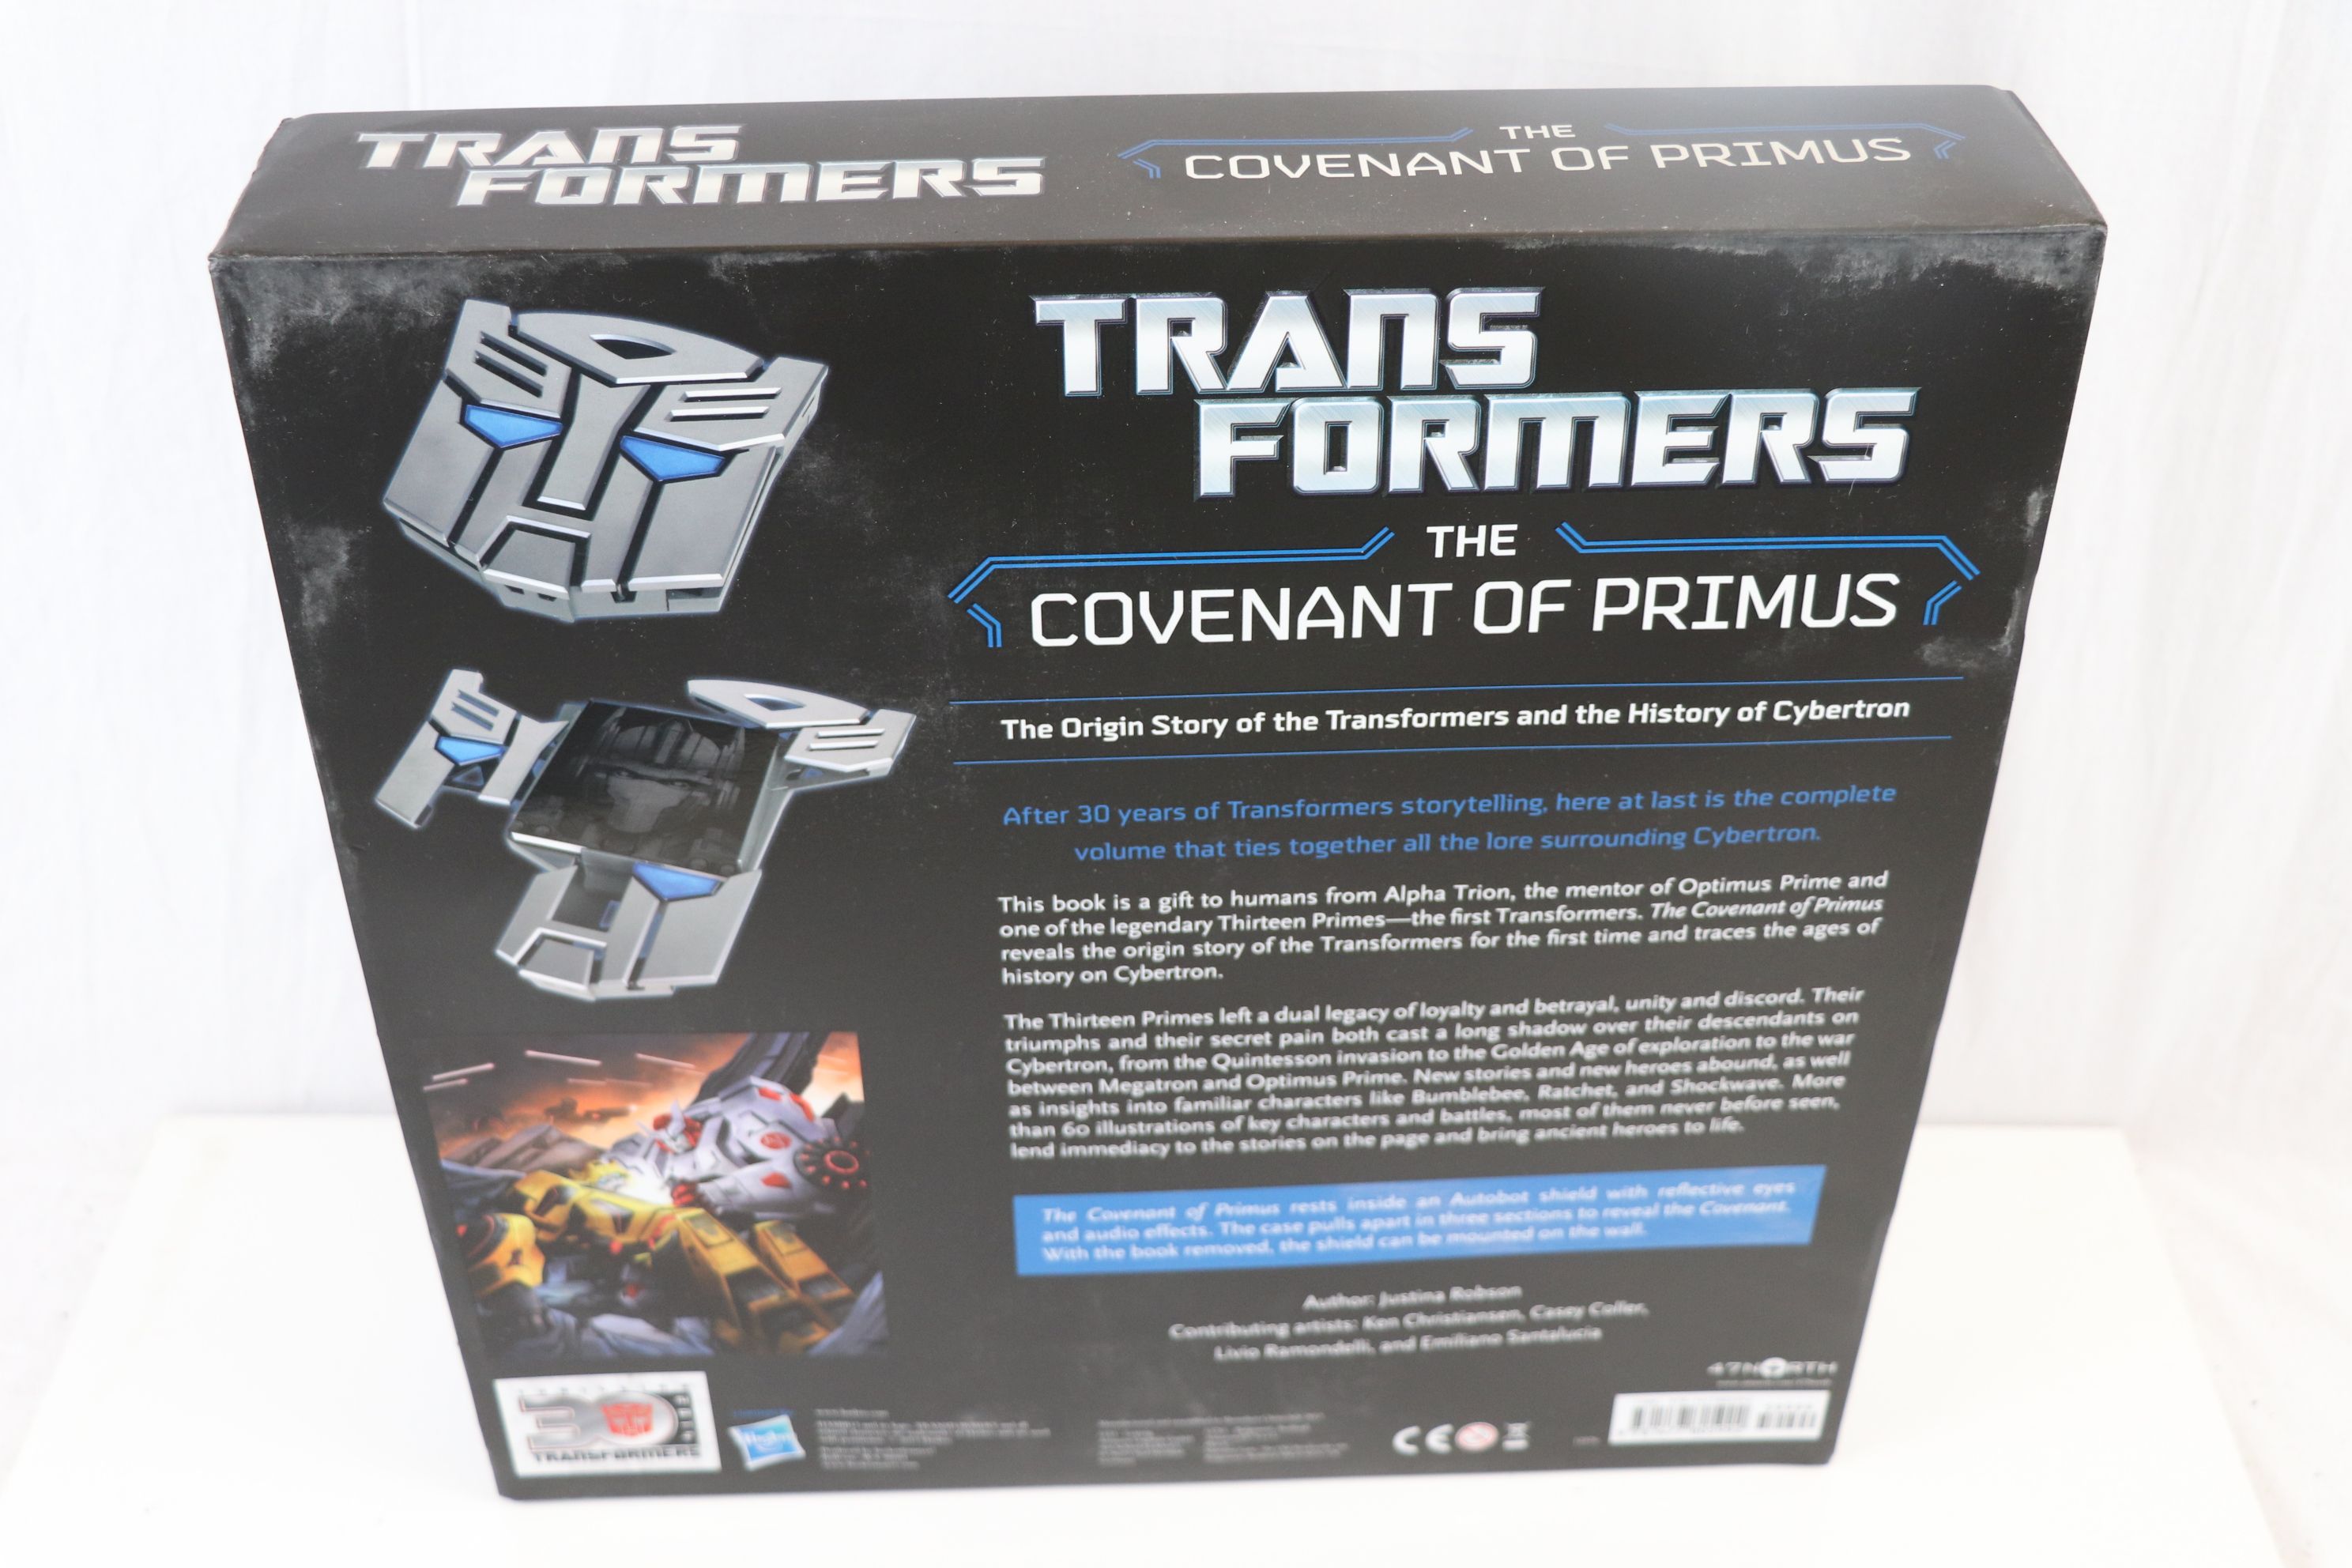 Boxed Hasbro 2014 Transformers The Covenant of Primus in excellent condition with original outer - Image 2 of 4